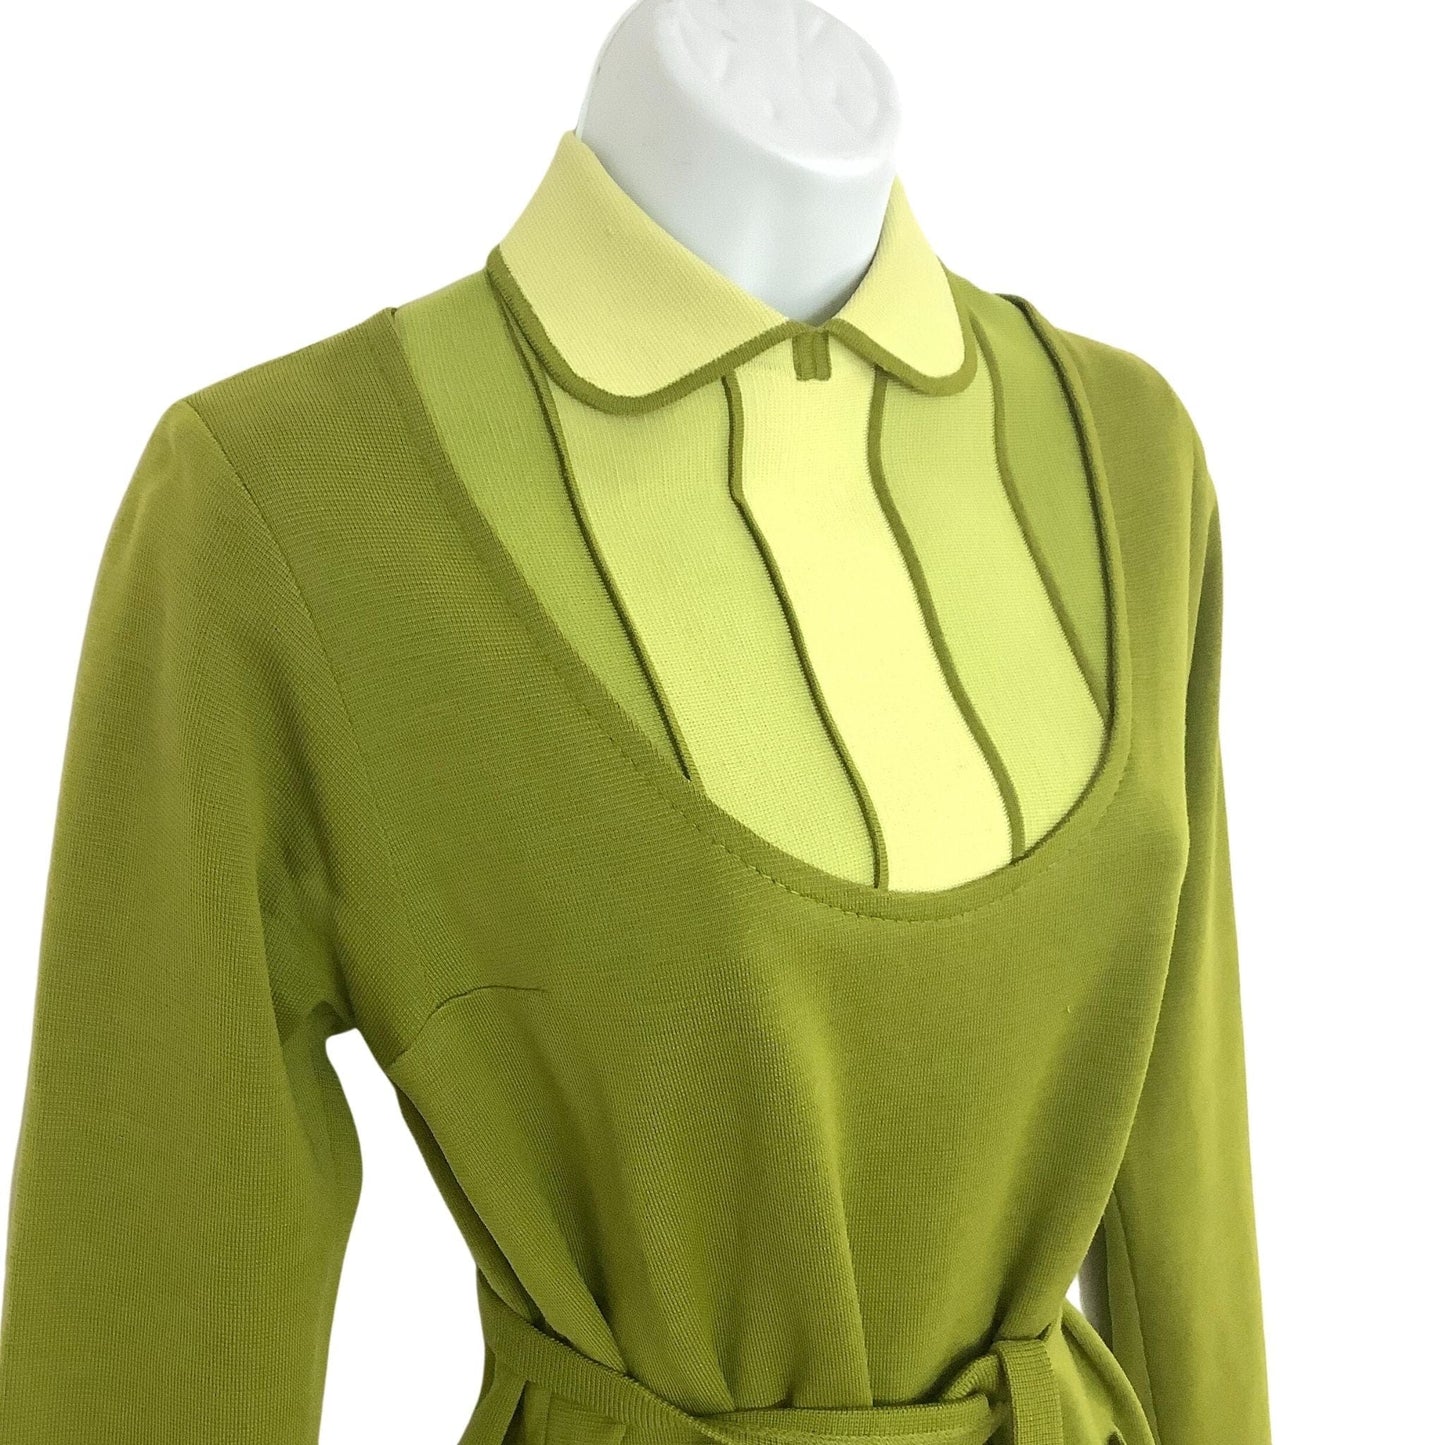 Vintage Green Knit Dress Small / Green / Vintage 1960s